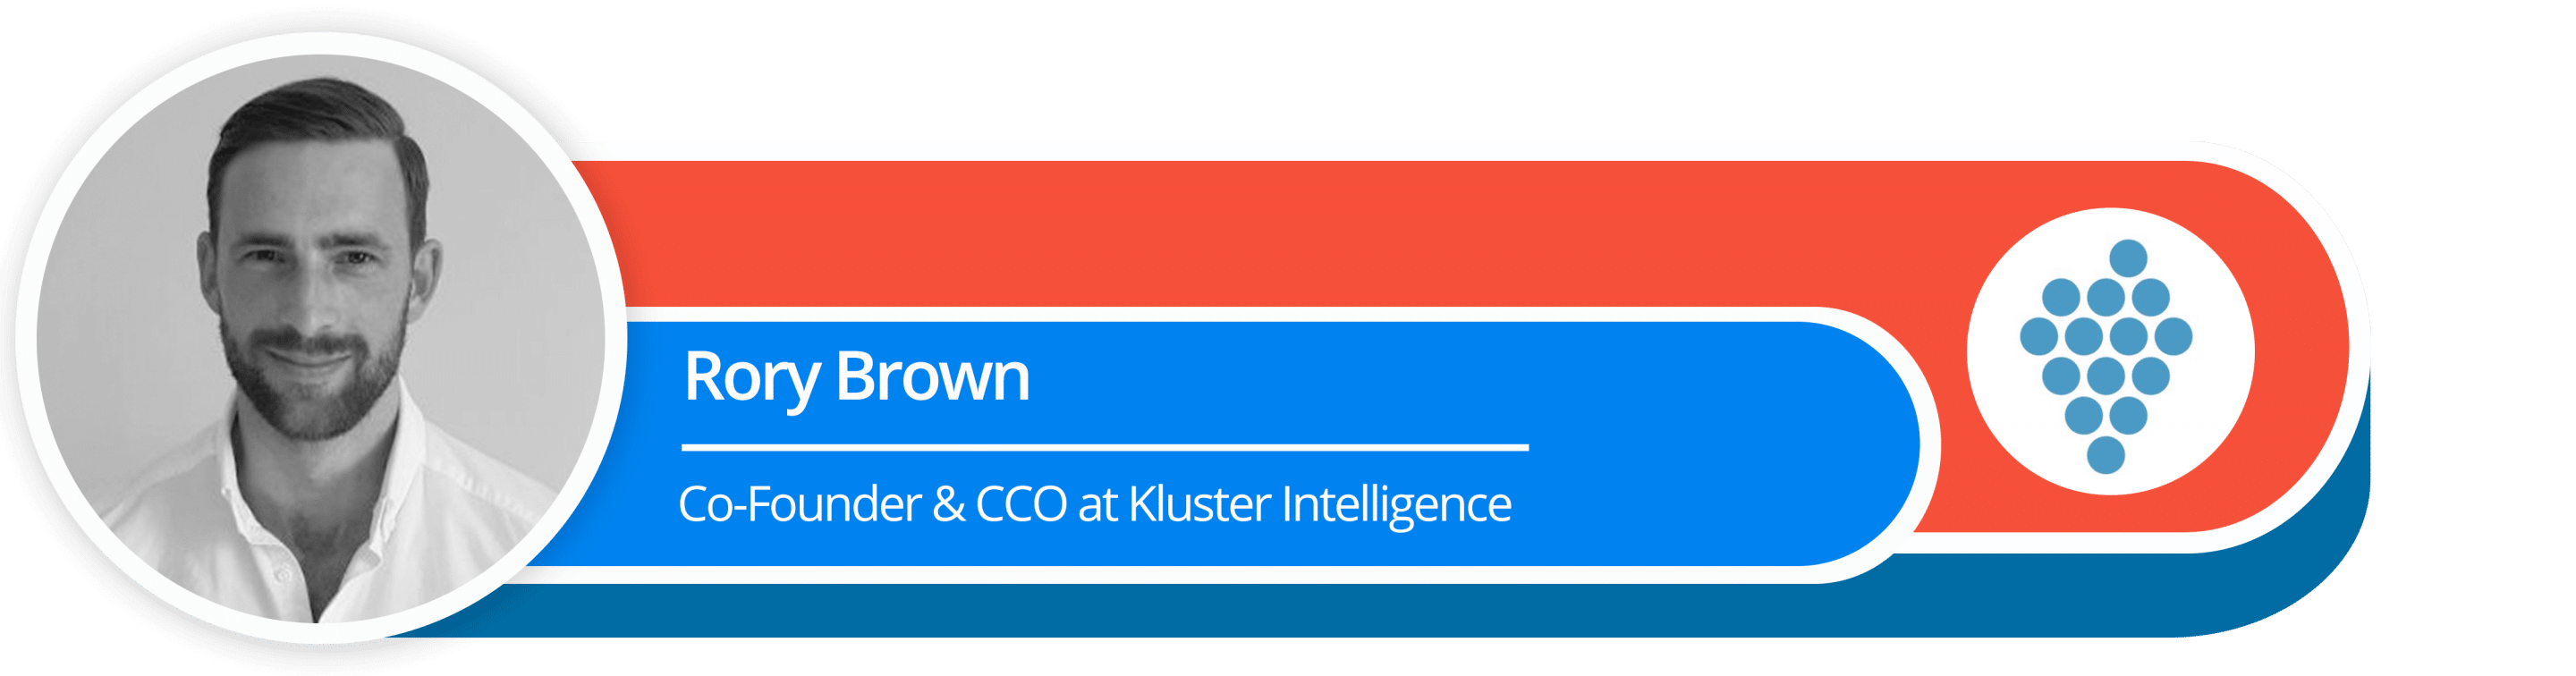 Rory Brown
Co-Founder & Chief Commercial Officer at Kluster Intelligence